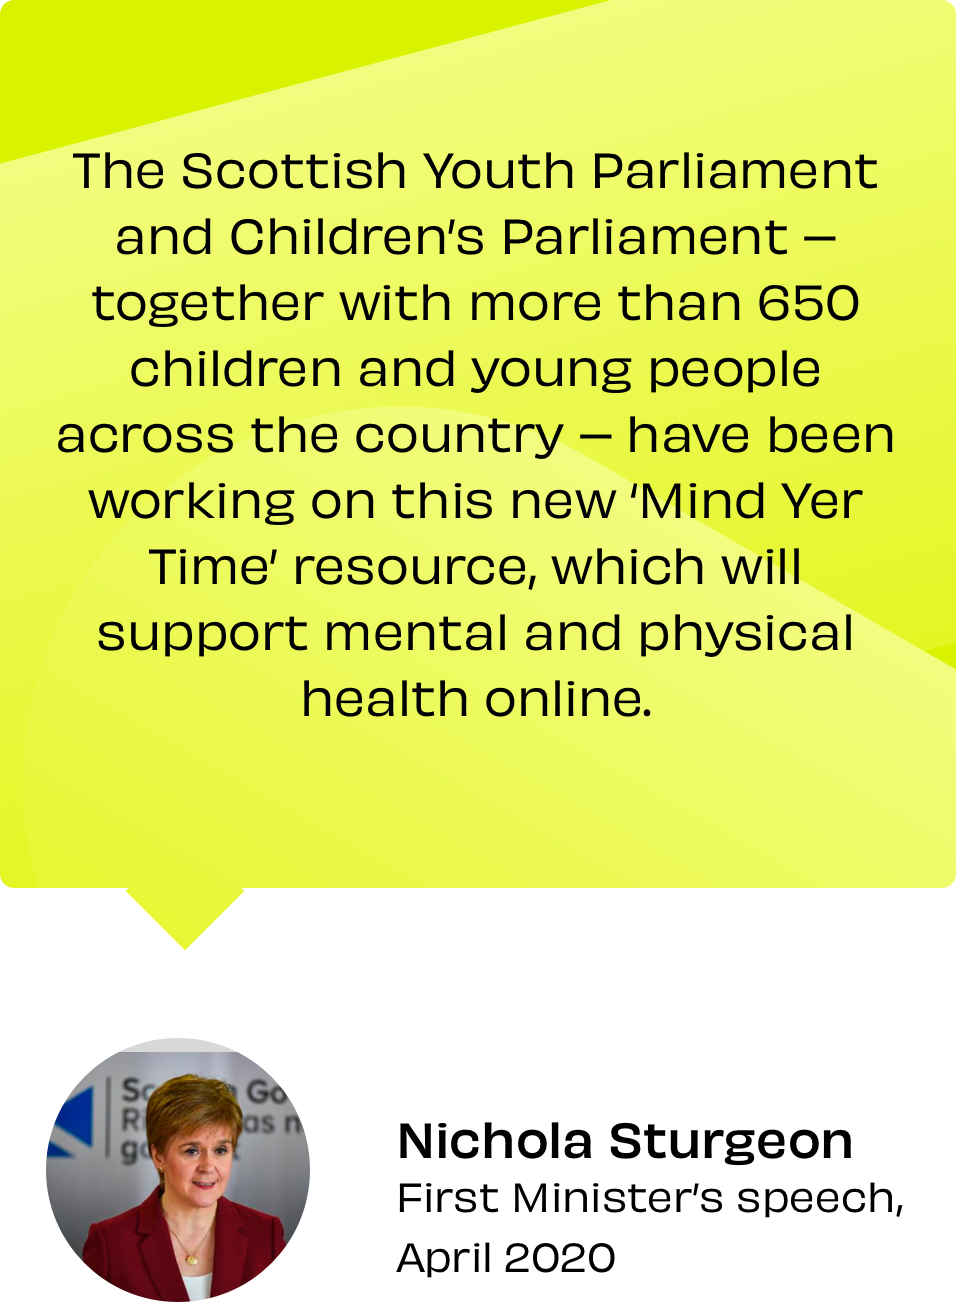 A quote from Nicola Sturgeon “The Scottish Youth Parliament and Children's Parliament together with more than 650 children and young people across the country - have been working on this new Mind Yer Time' resource, which will support mental and physical health online.” sits in a yellow speech bubble